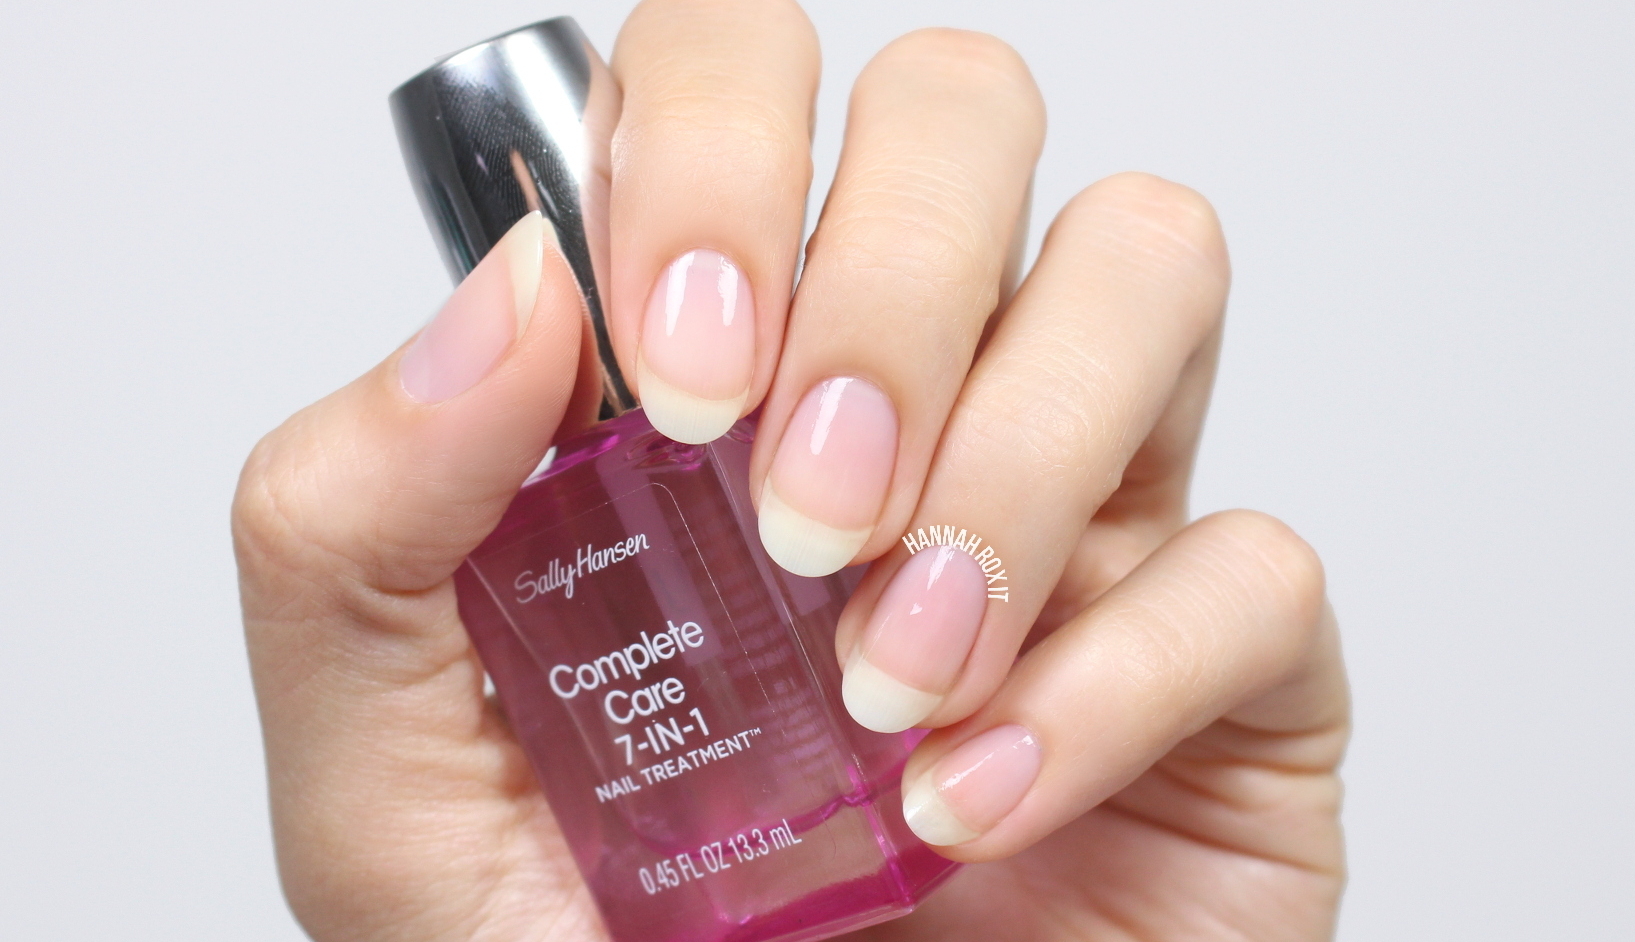 Sally Hansen Complete Care 7-in-1 Review – Hannah Rox It